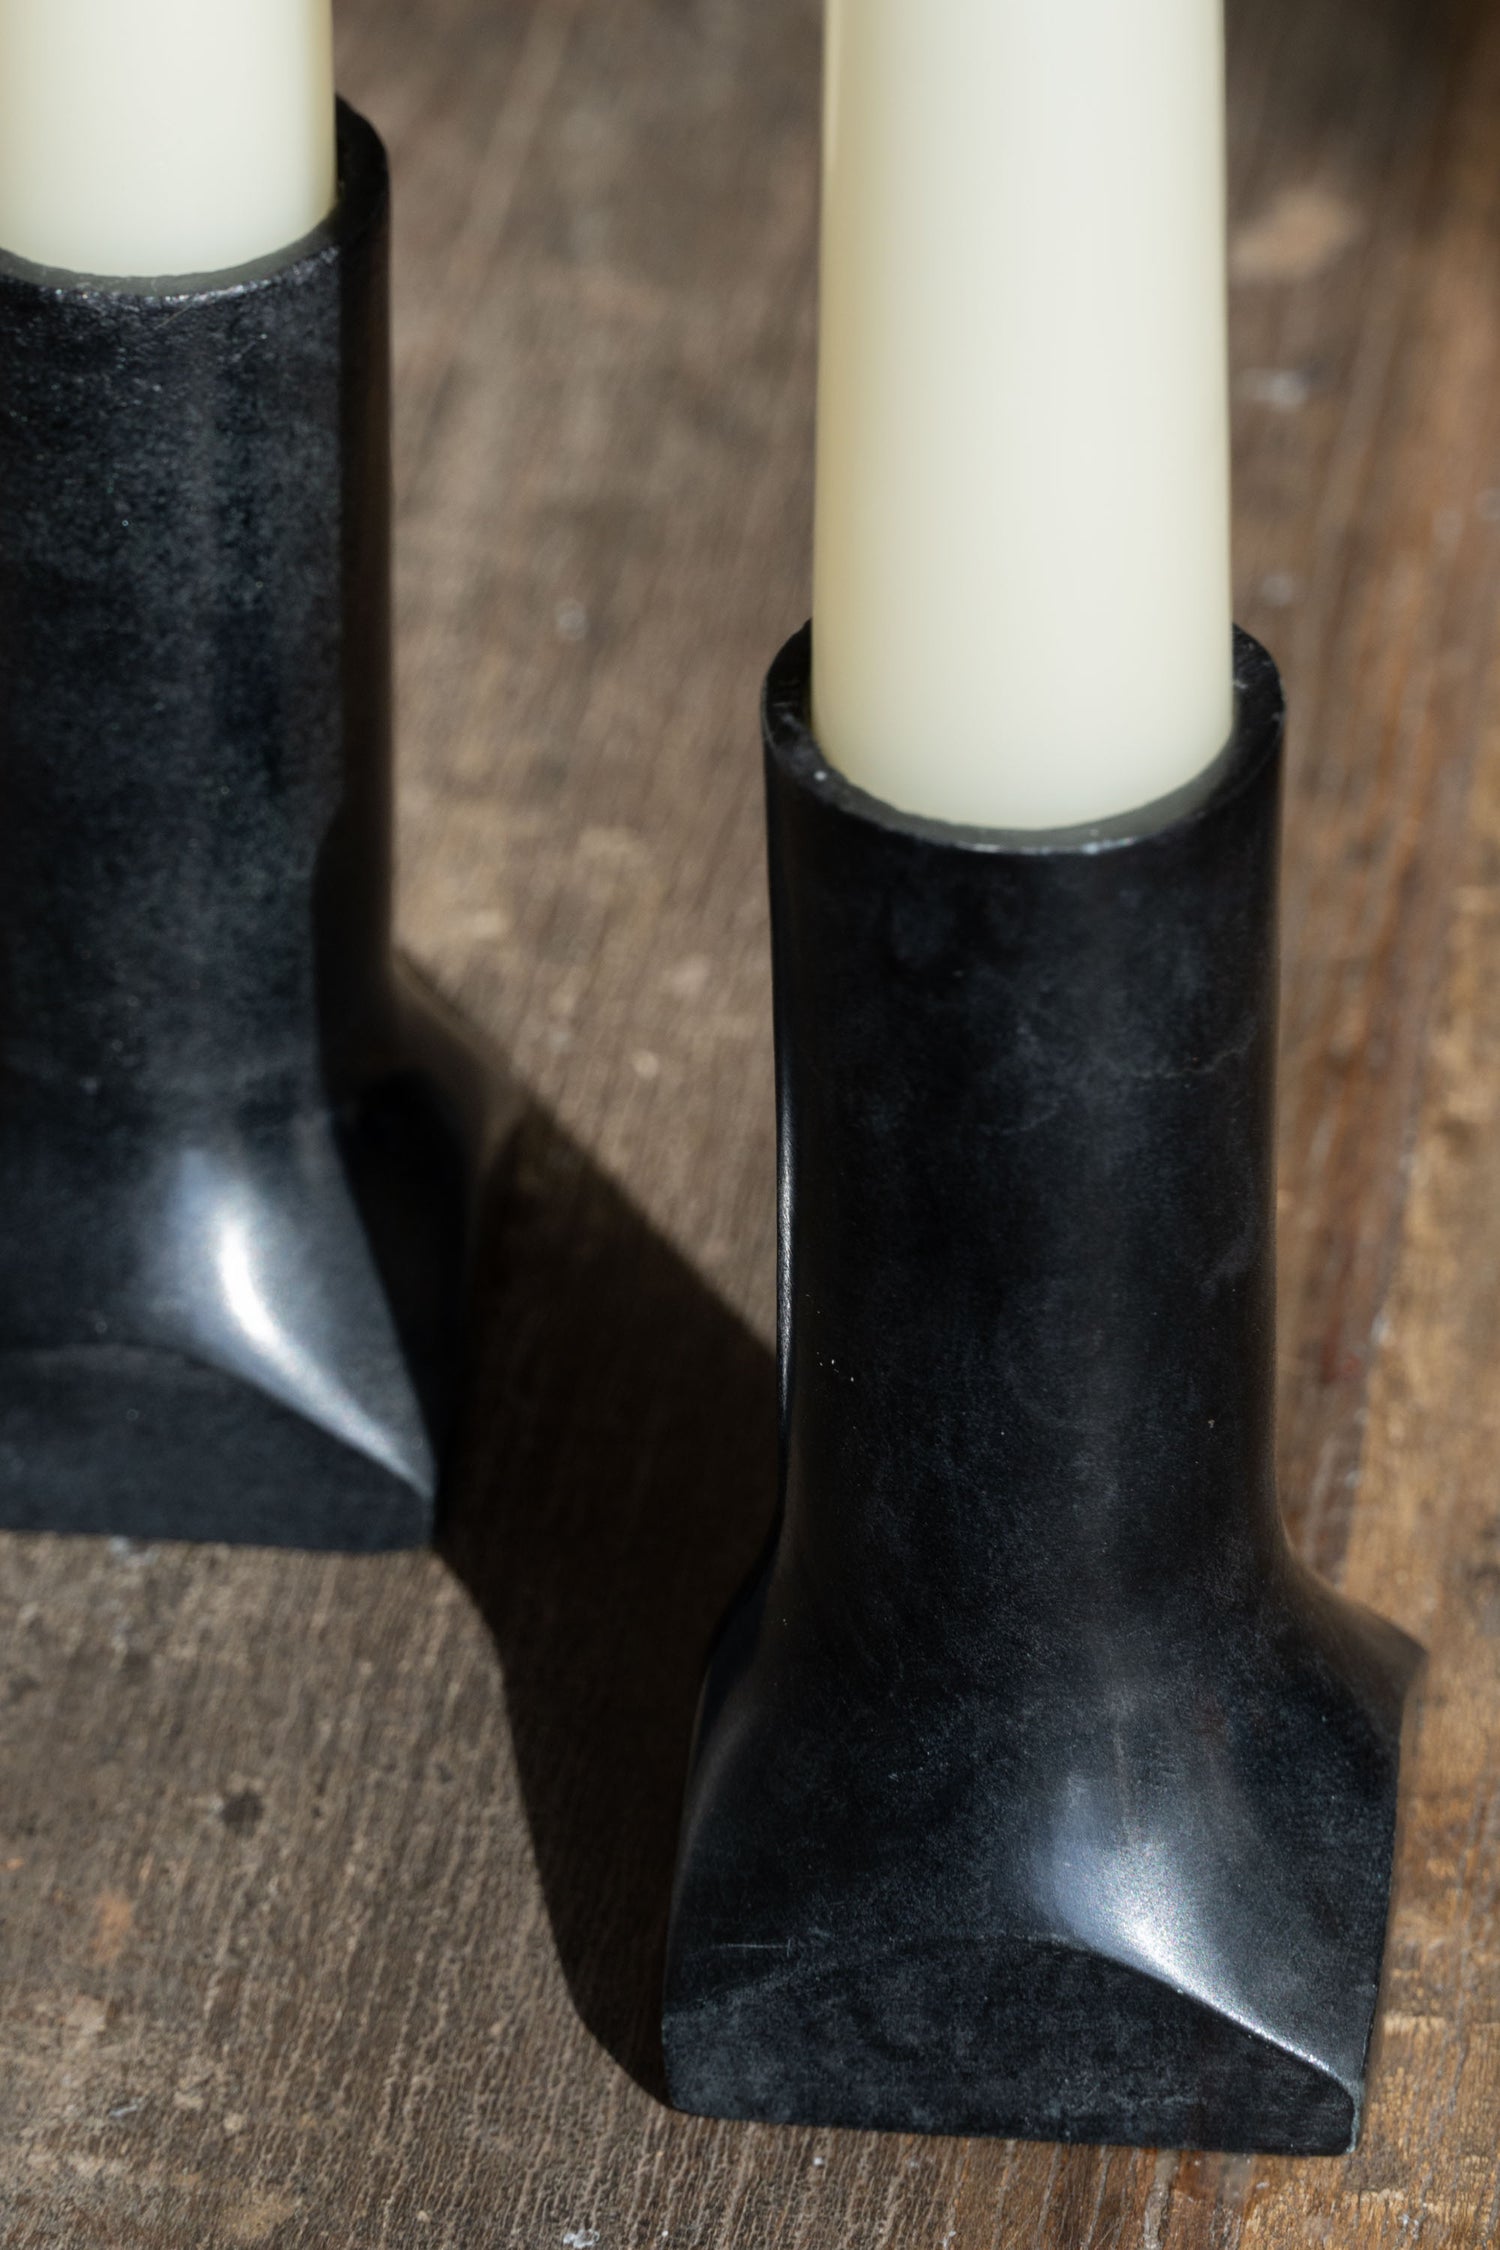 Close-up of the soapstone candleholder, showcasing its smooth texture and natural variations.